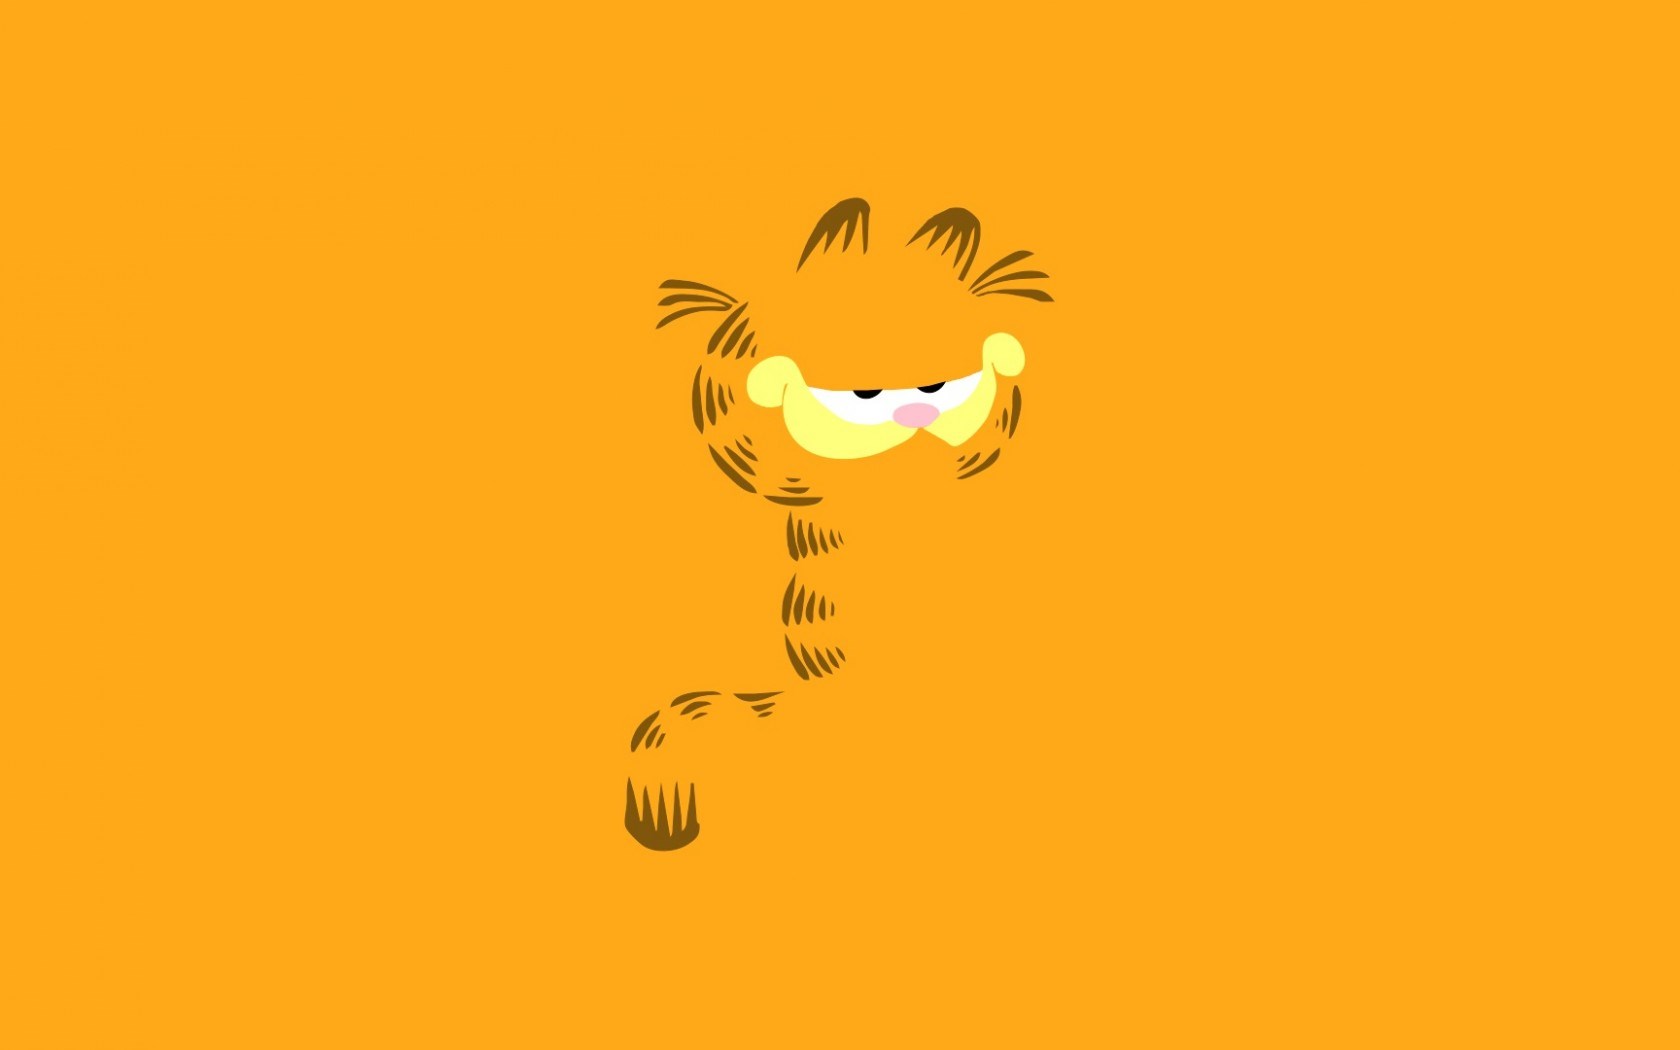 Garfield Wallpapers HD APK for Android Download